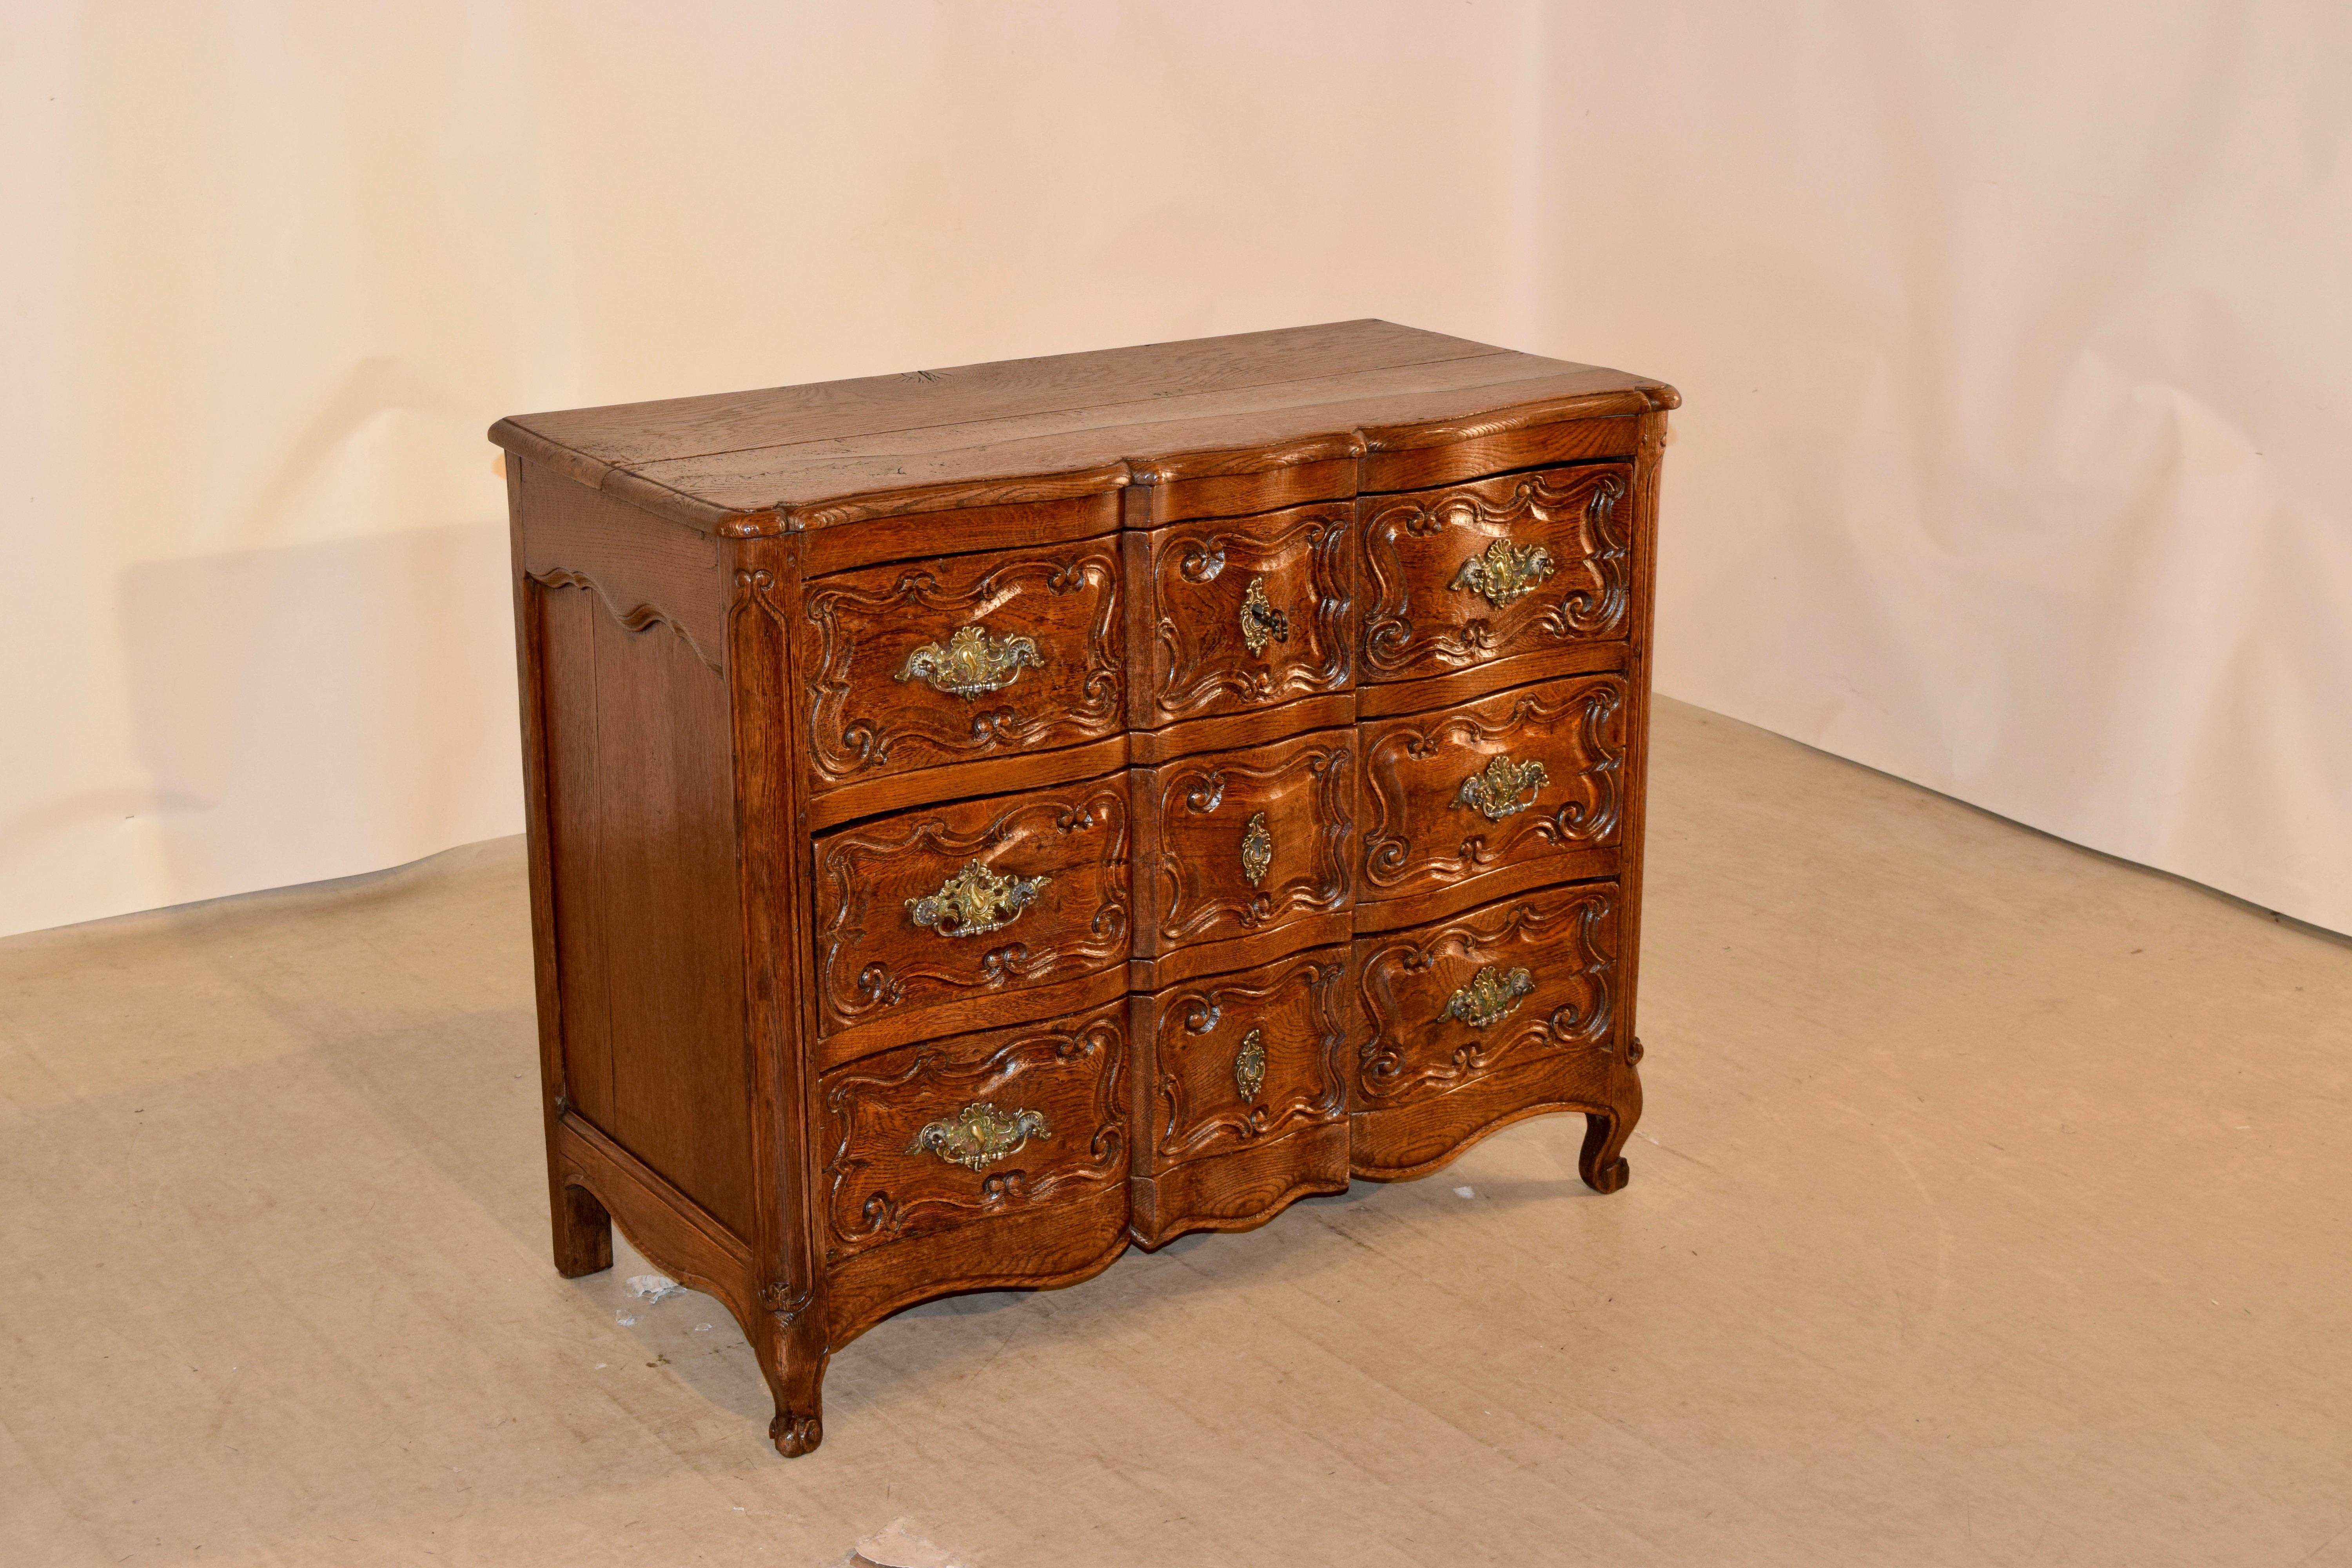 19th century oak chest from France with a serpentine front. The top has a beveled and scalloped edge, following down to hand shaped and paneled sides and three drawers in the front. The drawer fronts are hand paneled and shaped and have what appears